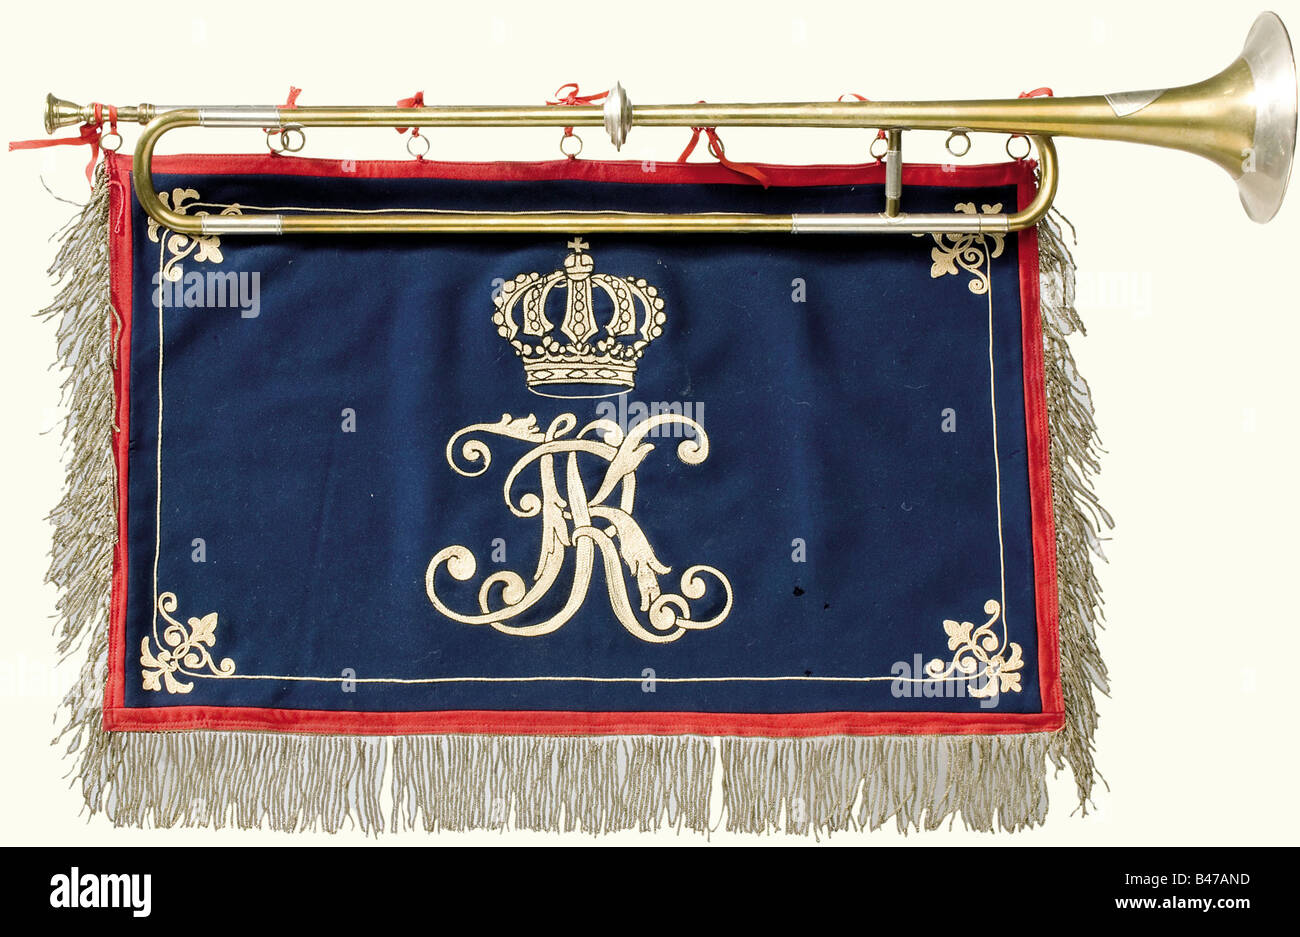 A trumpet with pennant, of the Grenadier-Regiment König Karl (5. Württembergisches) No. 123 Brass trumpet with nickel fittings produced by Reisser in Ulm. Length 80 cm. Dark blue cloth embroidered on both sides with the white-blue cipher 'KR' beneath a crown. Red trim on the edge and silver fringe on three sides. 60 x 38 cm. historic, historical, 19th century, Wuerttemberg, Wurttemberg, Württemberg, Southern Germany, the South of Germany, south german, object, objects, stills, clipping, clippings, cut out, cut-out, cut-outs, insignia, symbols, symbol, emblem, e, Stock Photo